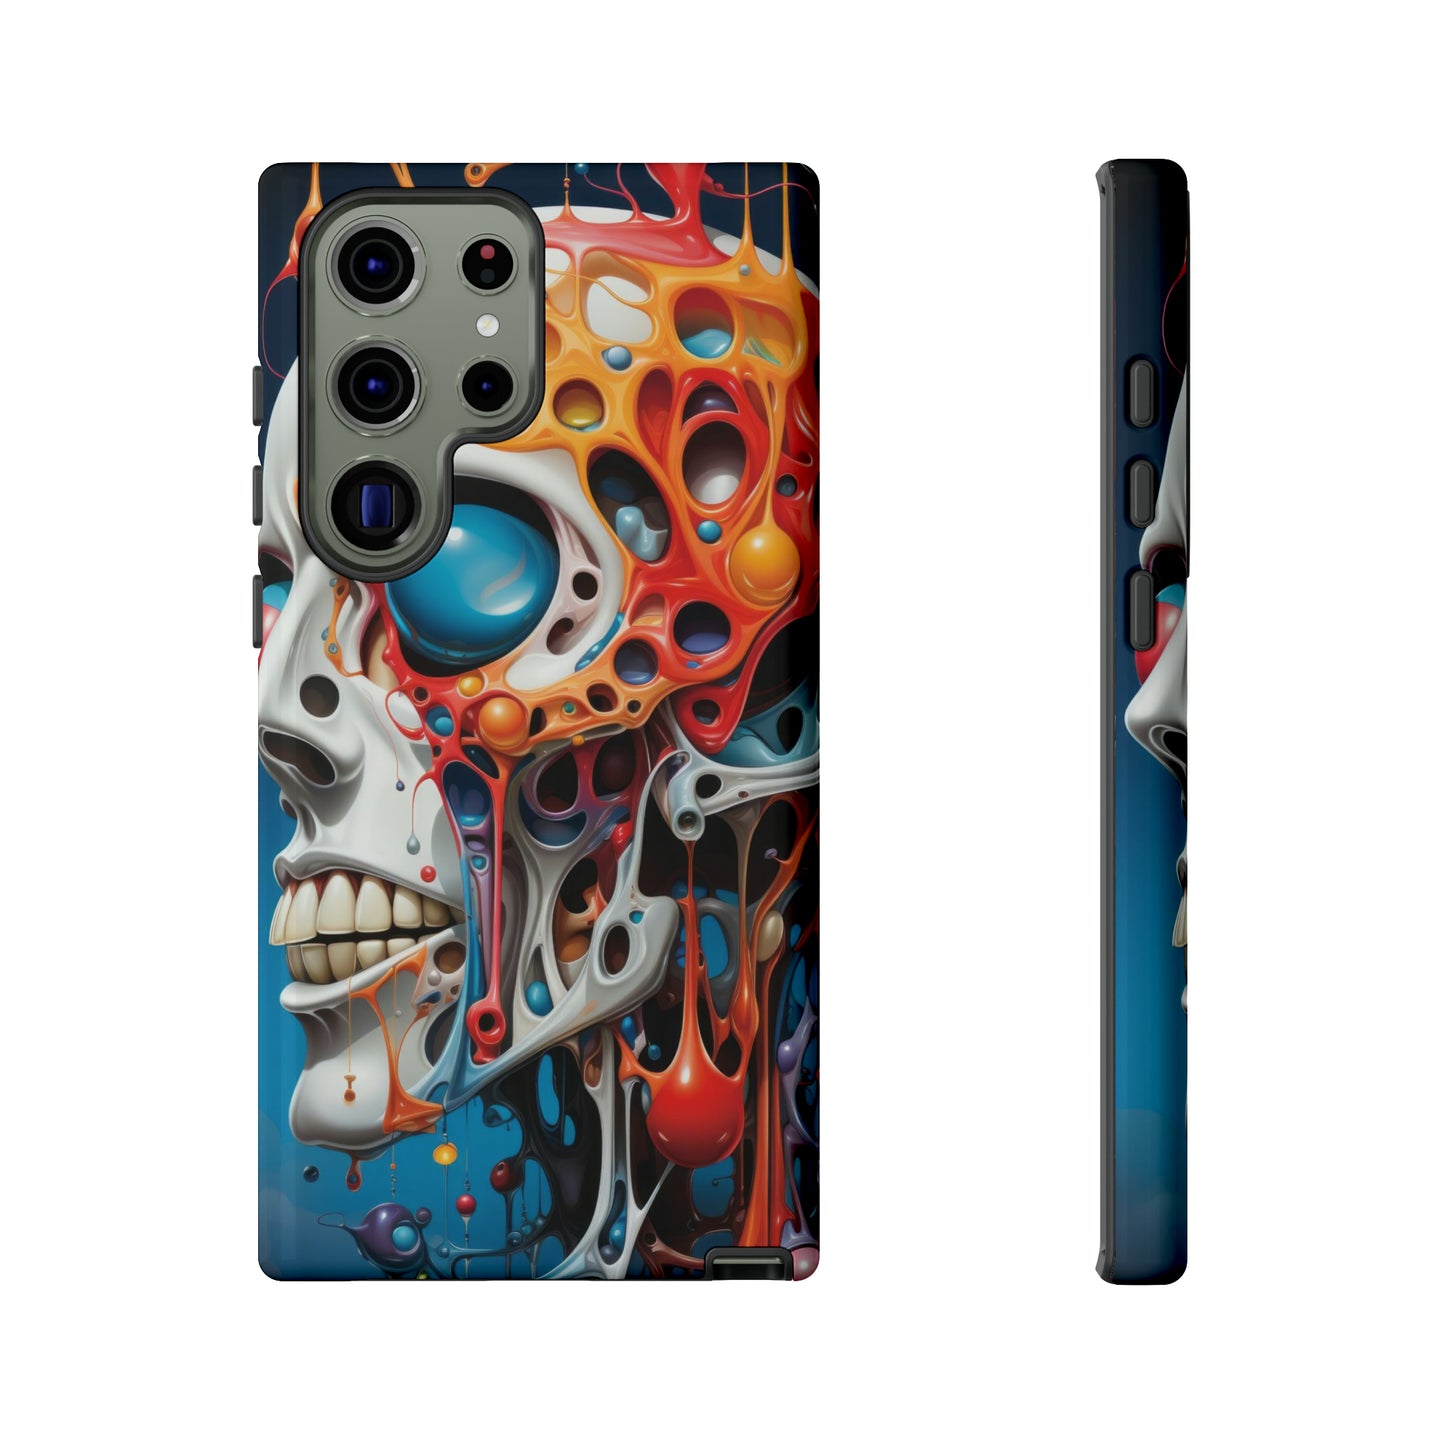 Melting Skull Spectrum Phone Case - Dripping Colors for iPhone, Samsung, Pixel